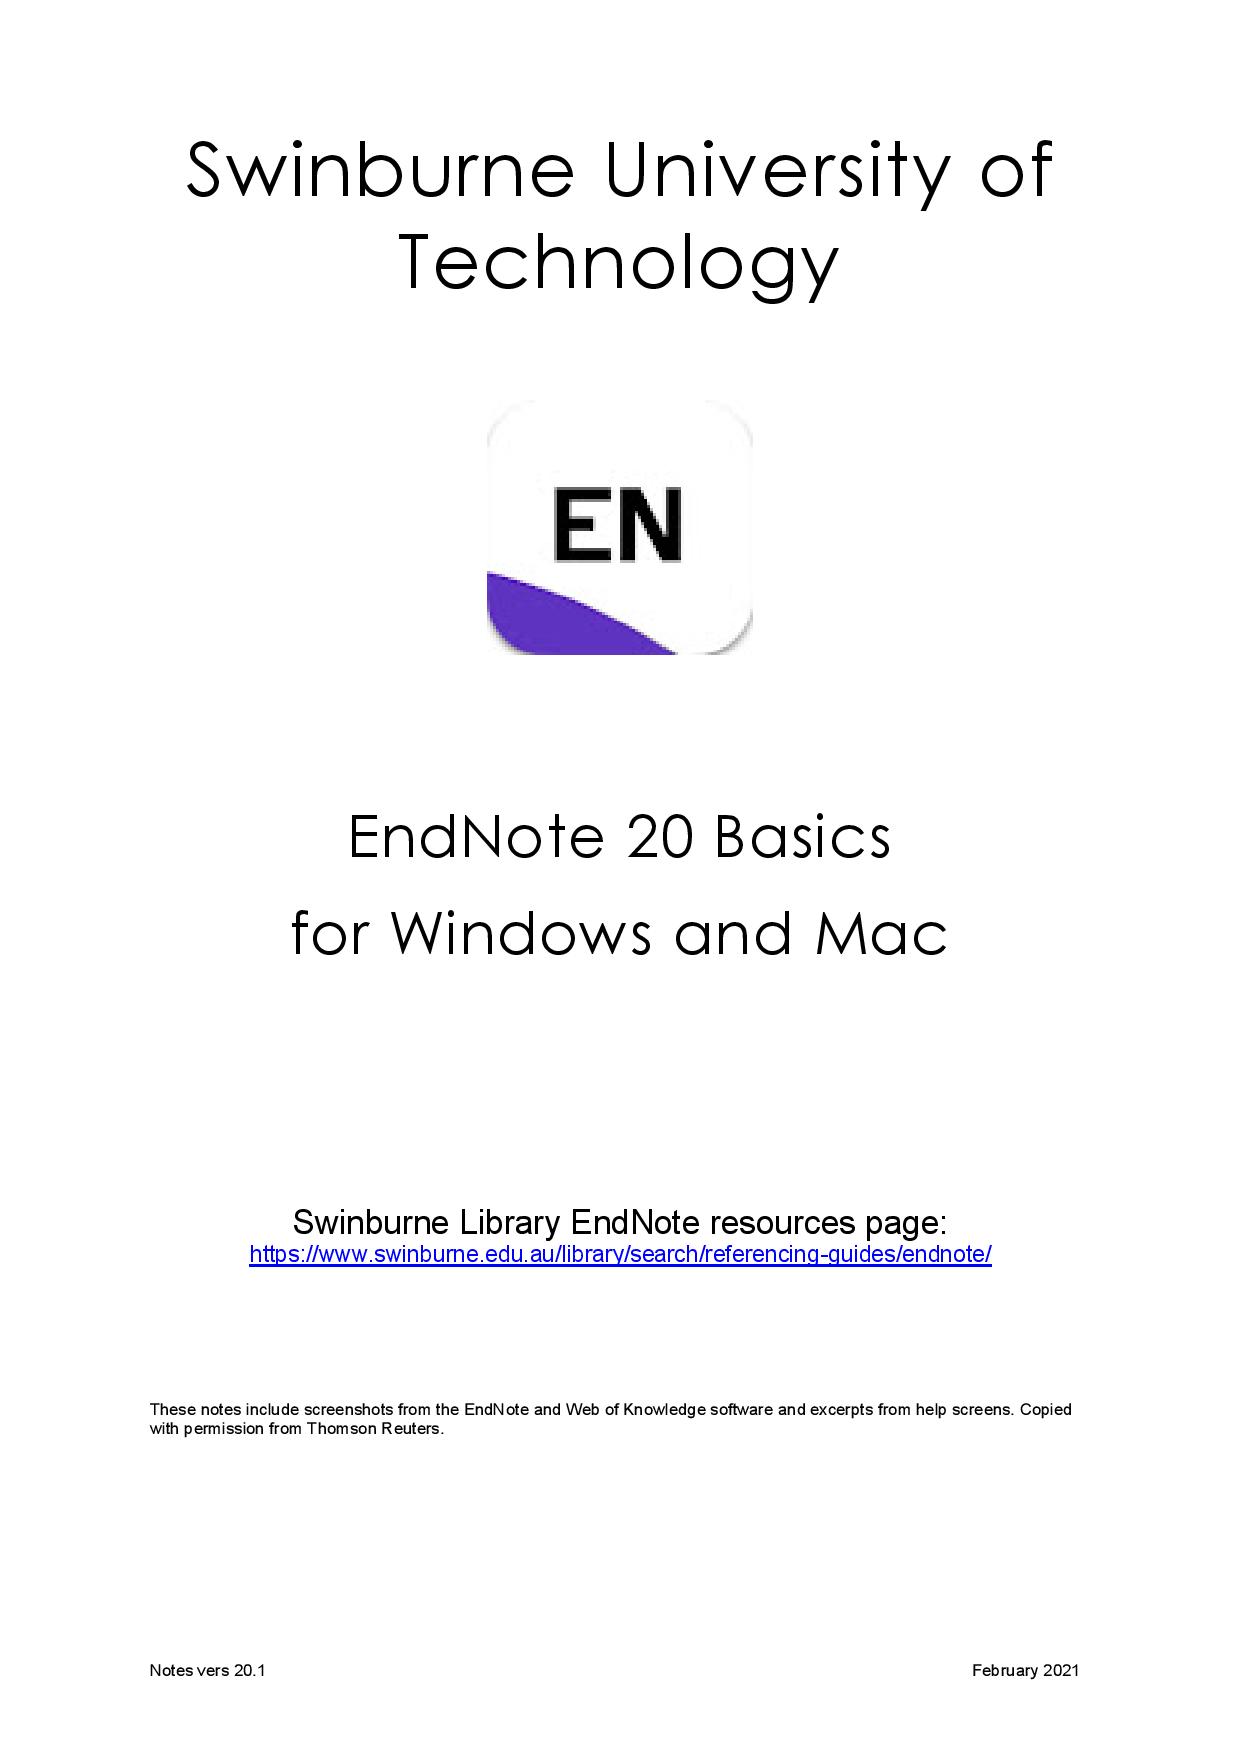 install endnote styles